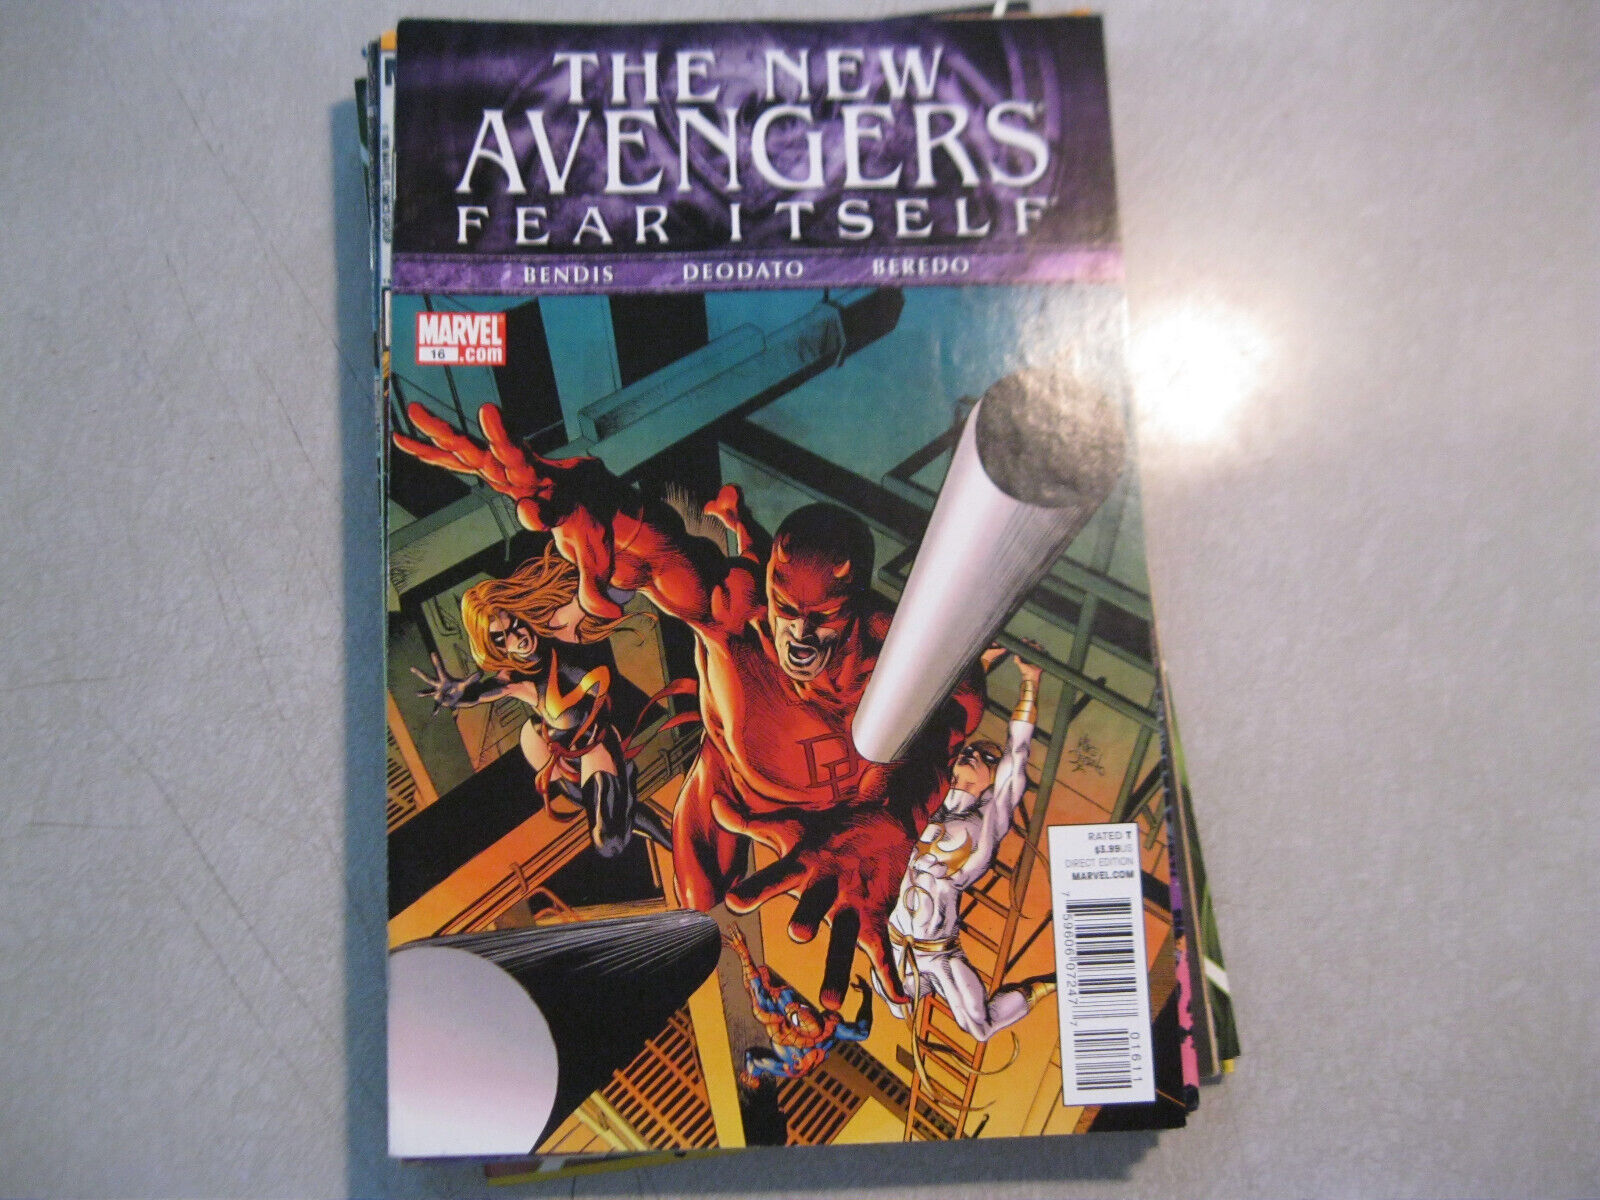 the new avengers #16 by BRIAN MICHAEL BENDIS & MIKE DEODATO fear itself